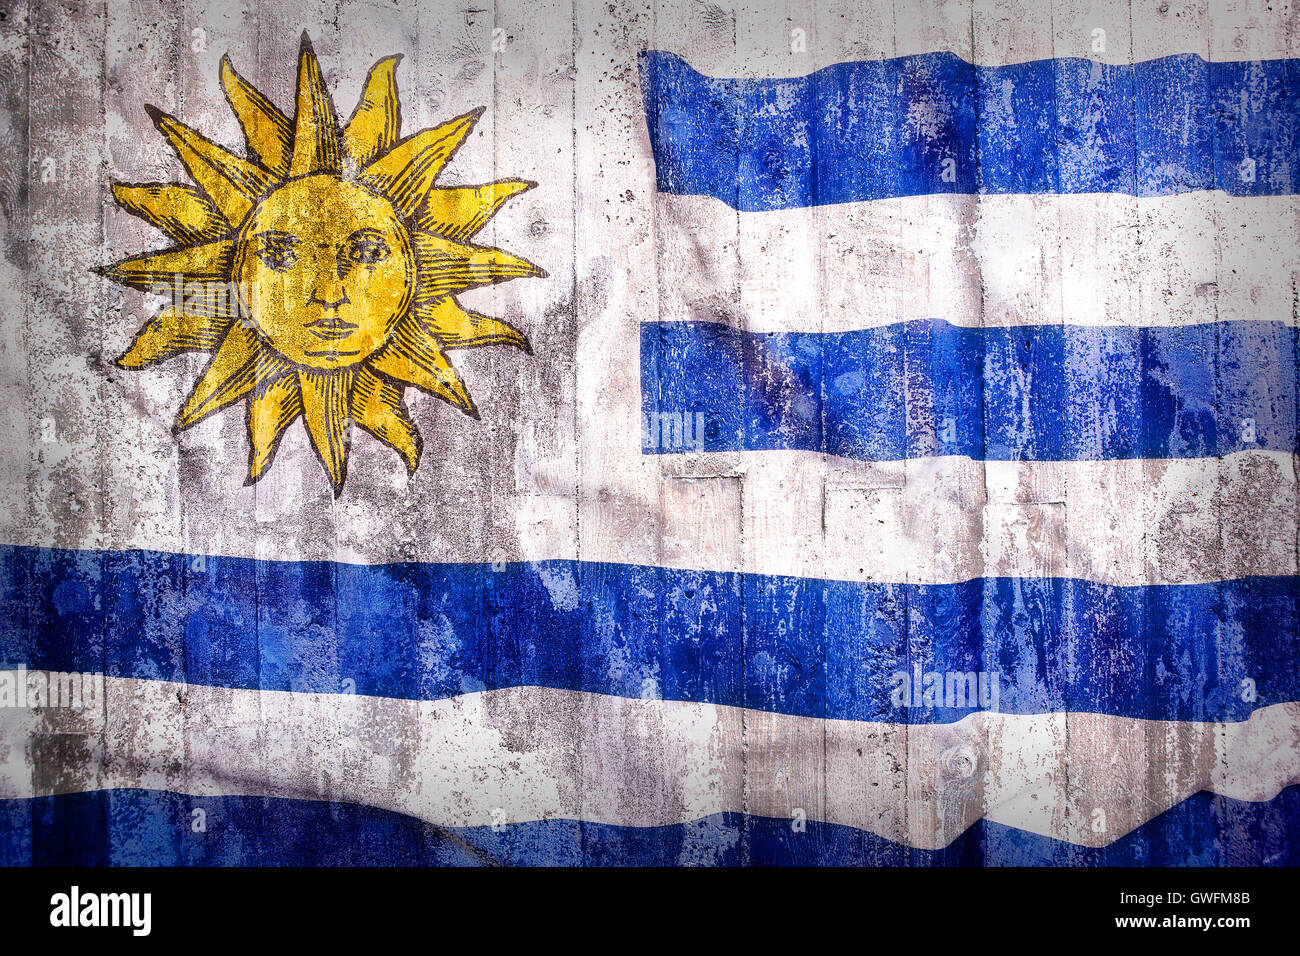 Grunge style of Uruguay flag on a brick wall for background Stock Photo